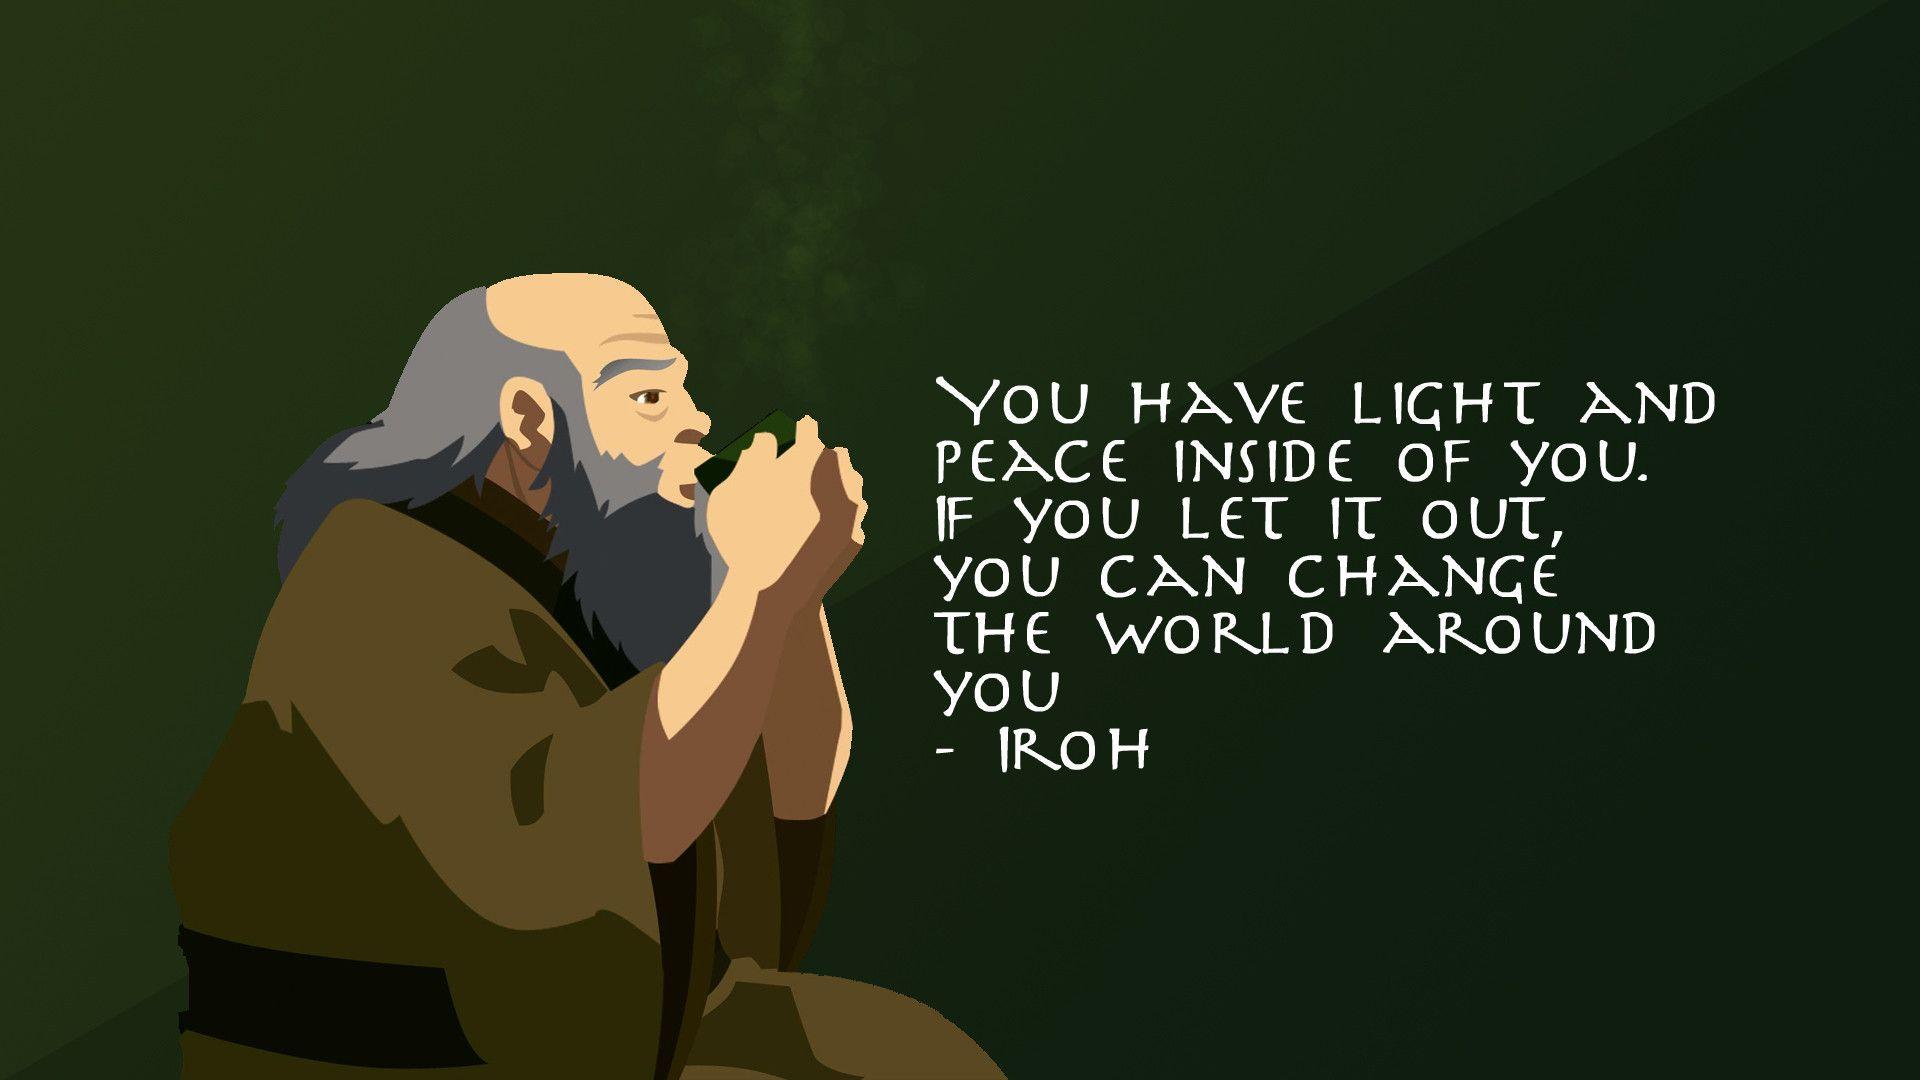 Uncle Iroh inspirational quote wallpaper 1080p